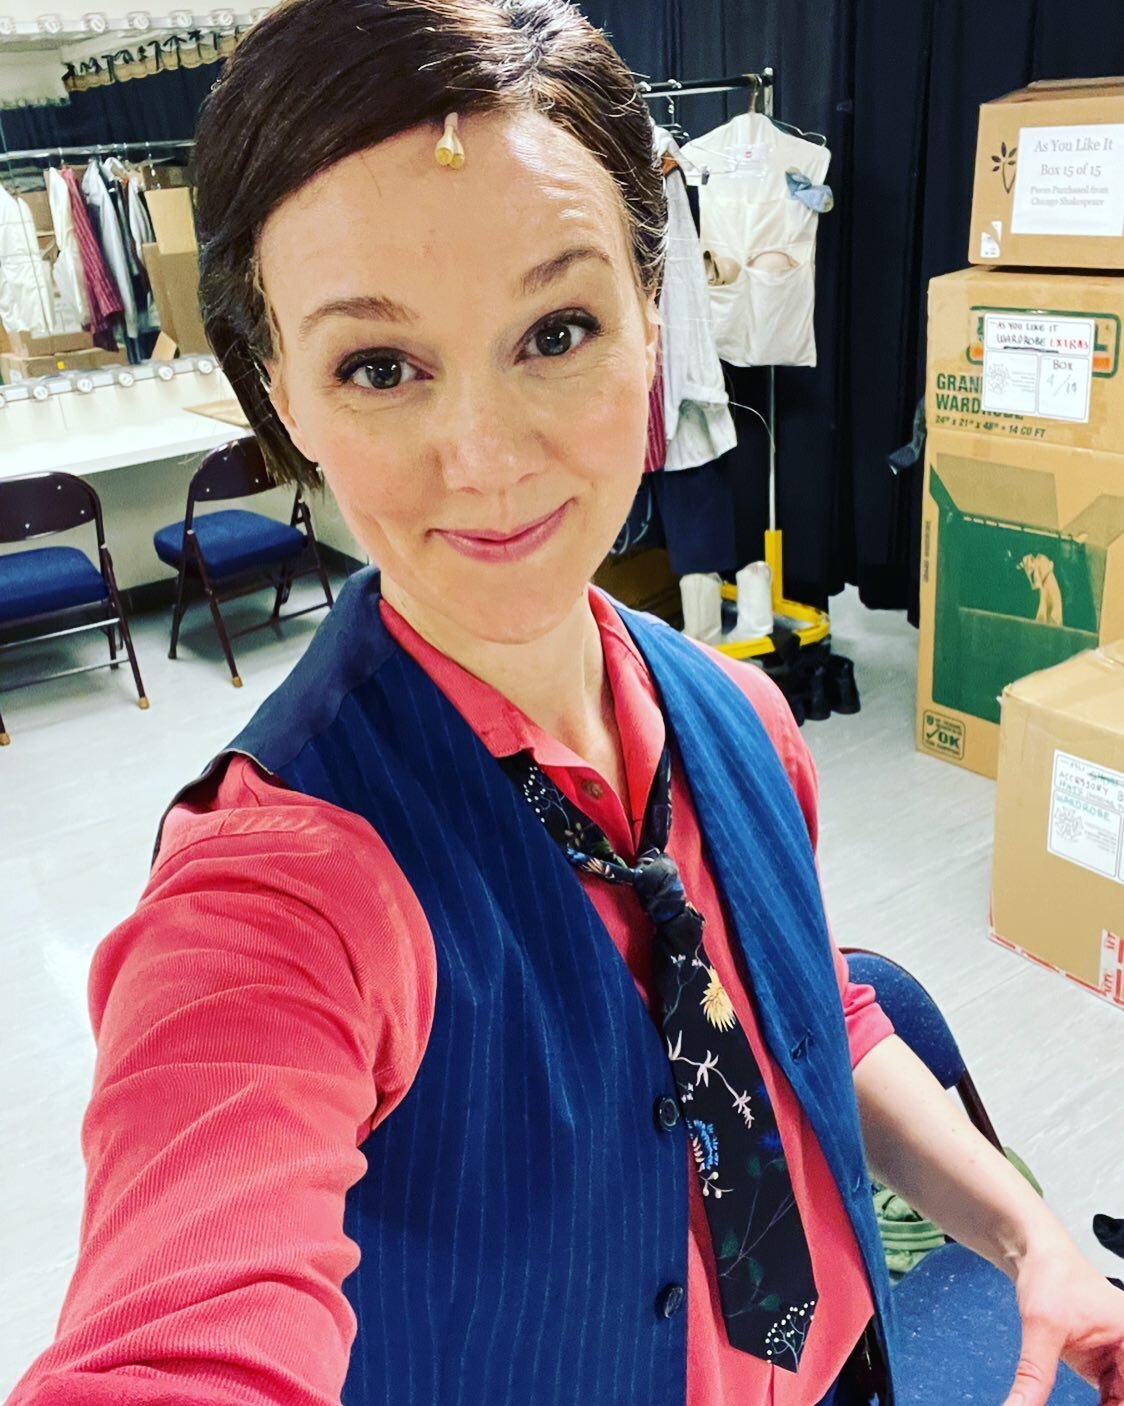 Last night I had the great privilege to go on as Rosalind. As @pahadah beautifully reminded me, I&rsquo;ve been with this show since September. I have loved every minute of these last nearly 7 months!!!! (with a long break at the holiday)
 
A huge th